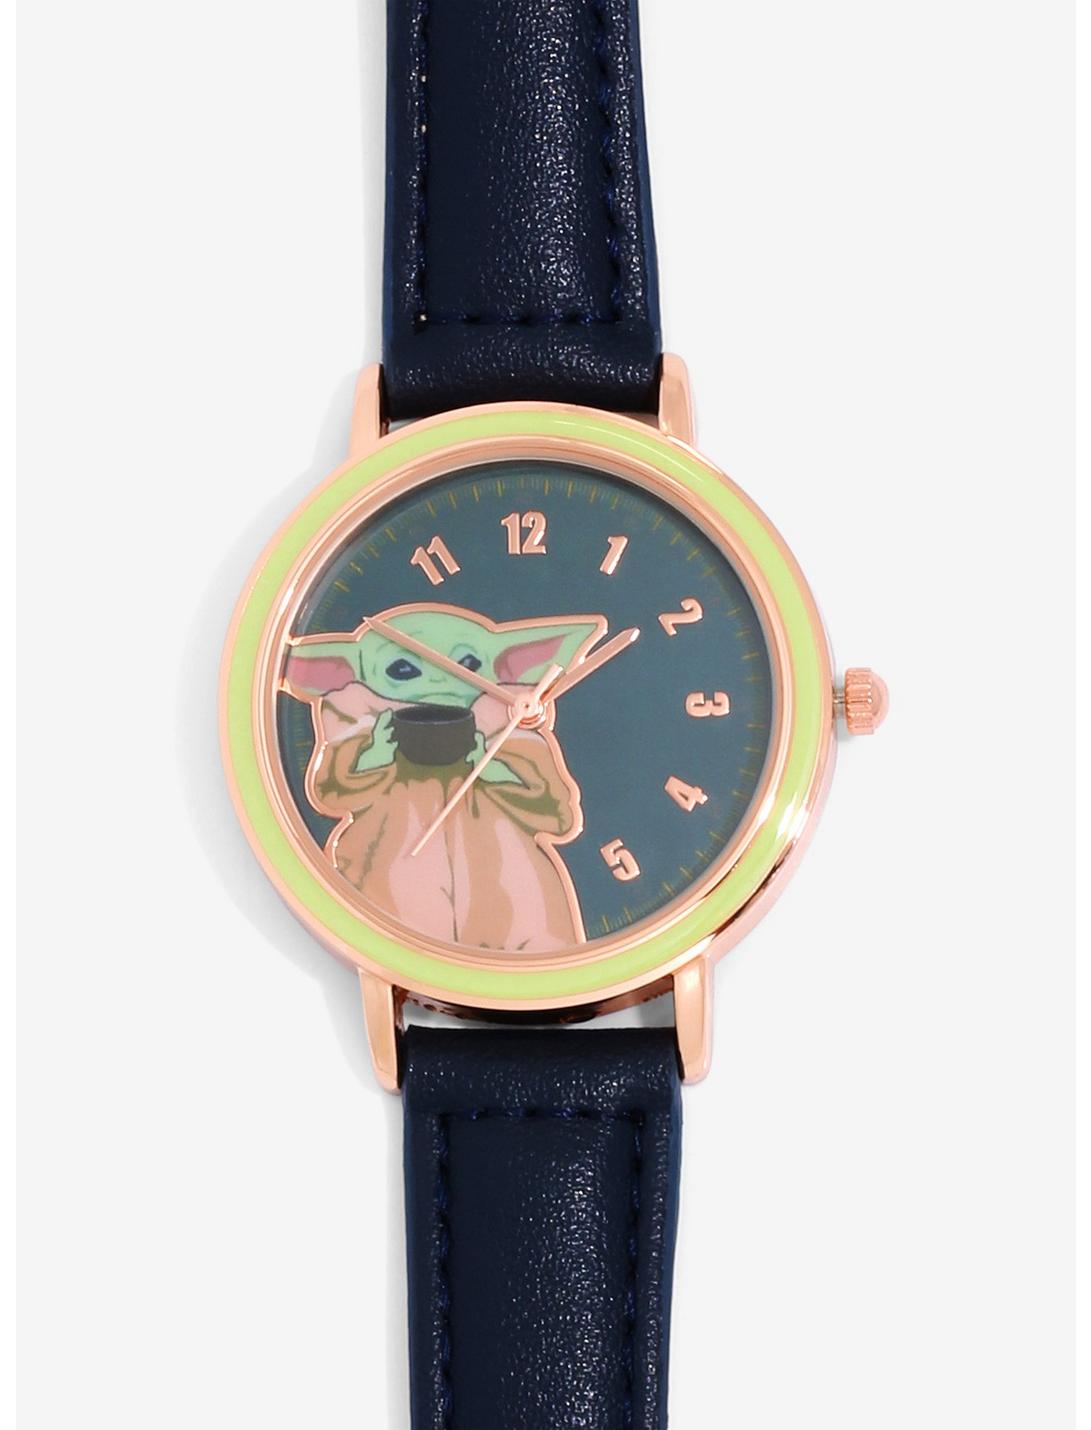 Star Wars The Mandalorian The Child Cup Watch, , hi-res